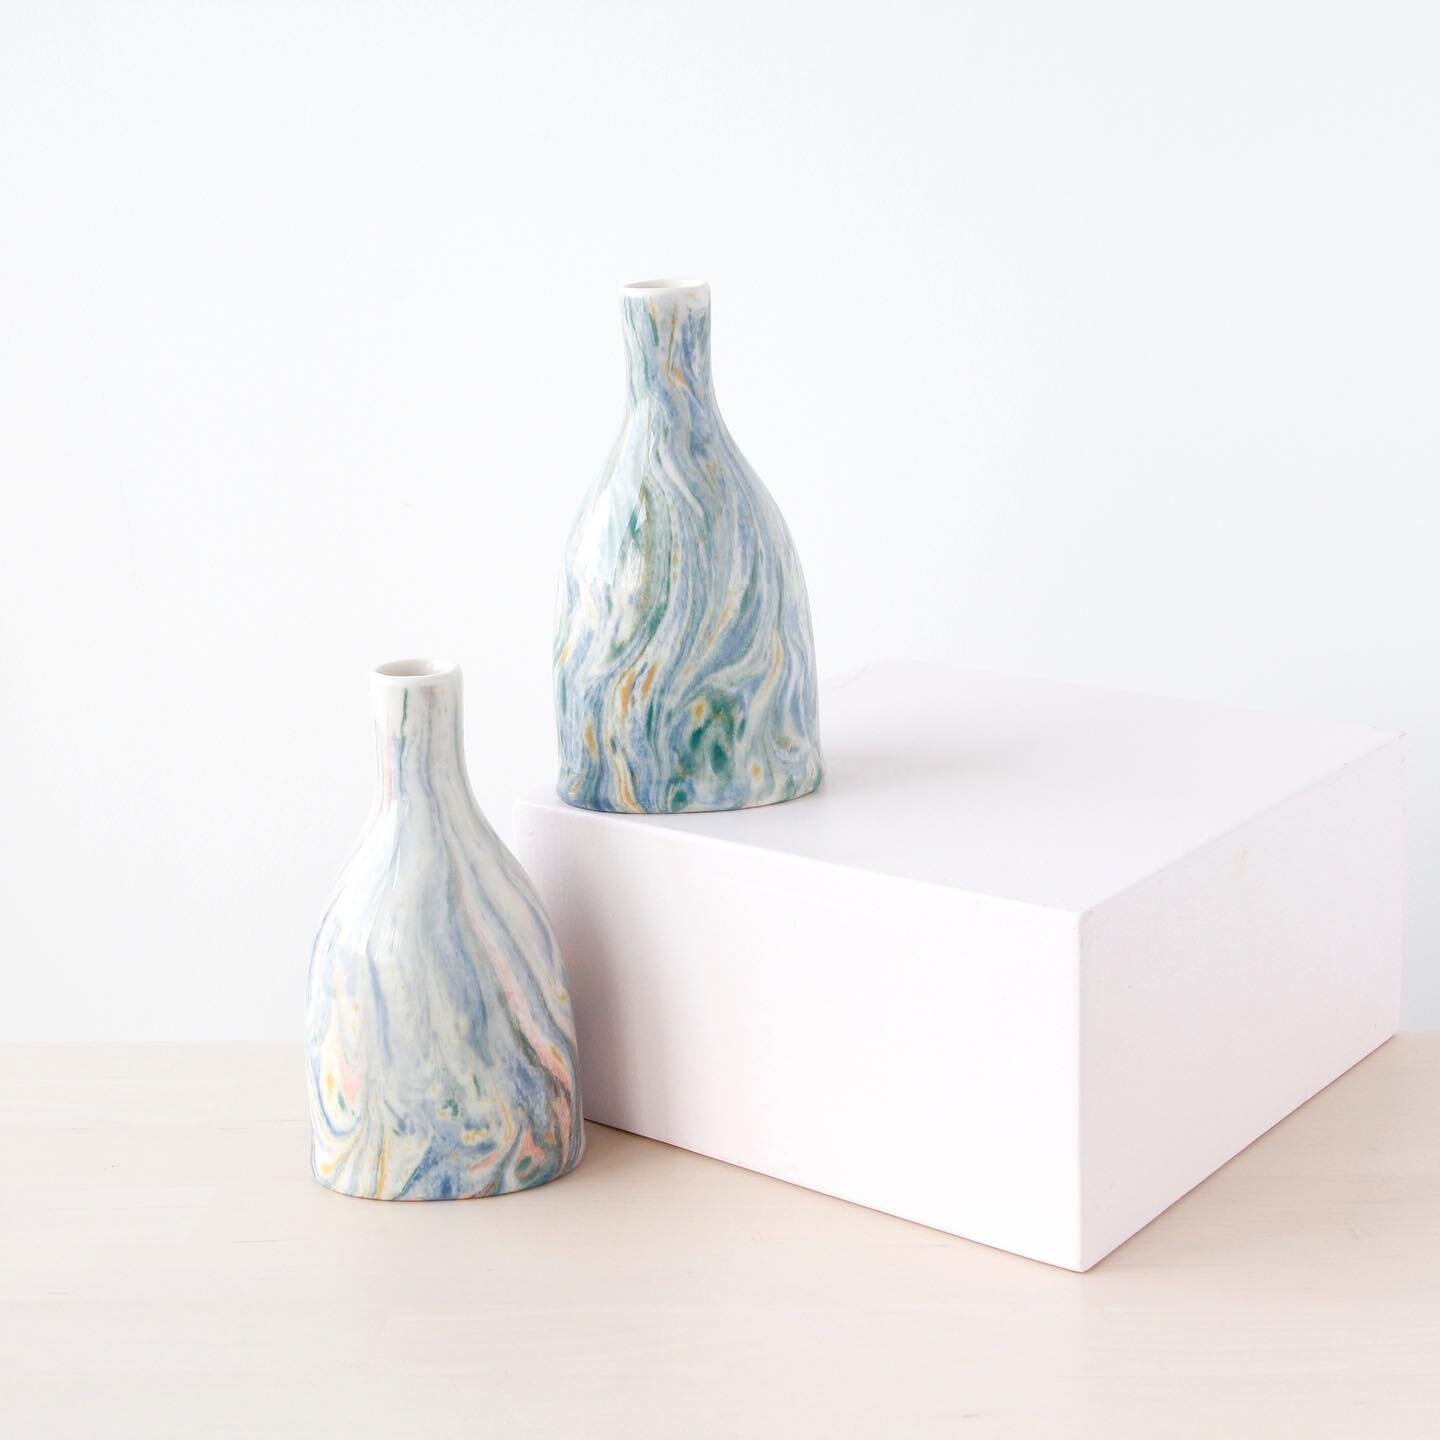 It&rsquo;s a nice day to be out around town with my son who is on his spring break right now. Online shop restock likely happening next week with a few more marbled vases in the mix!